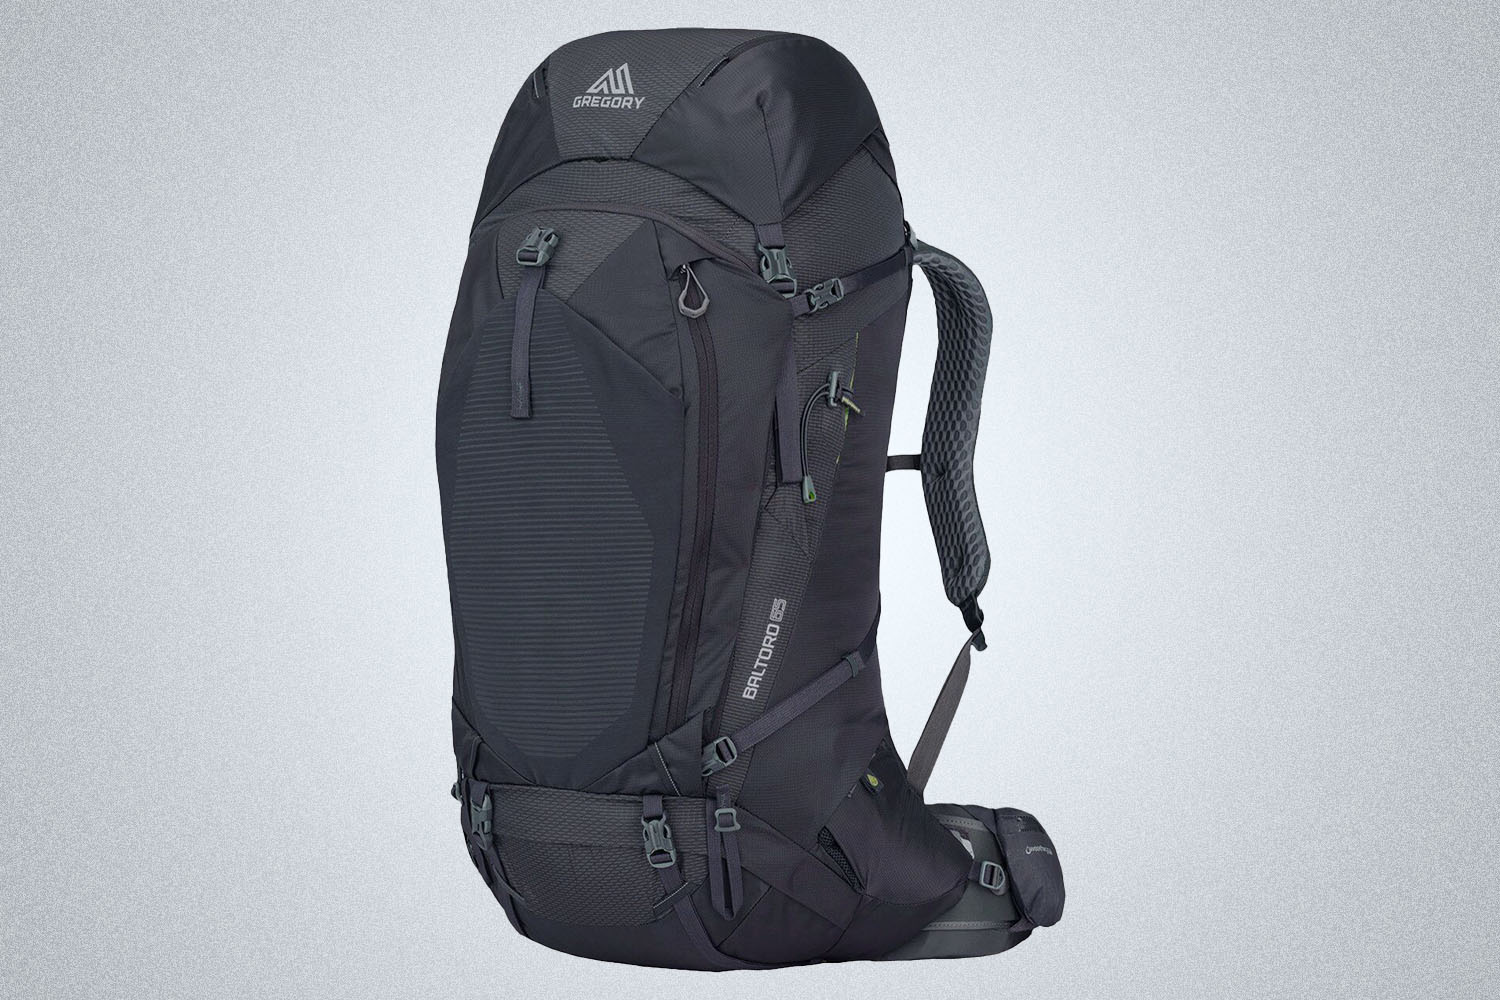 a black backpack from Gregory on a grey background